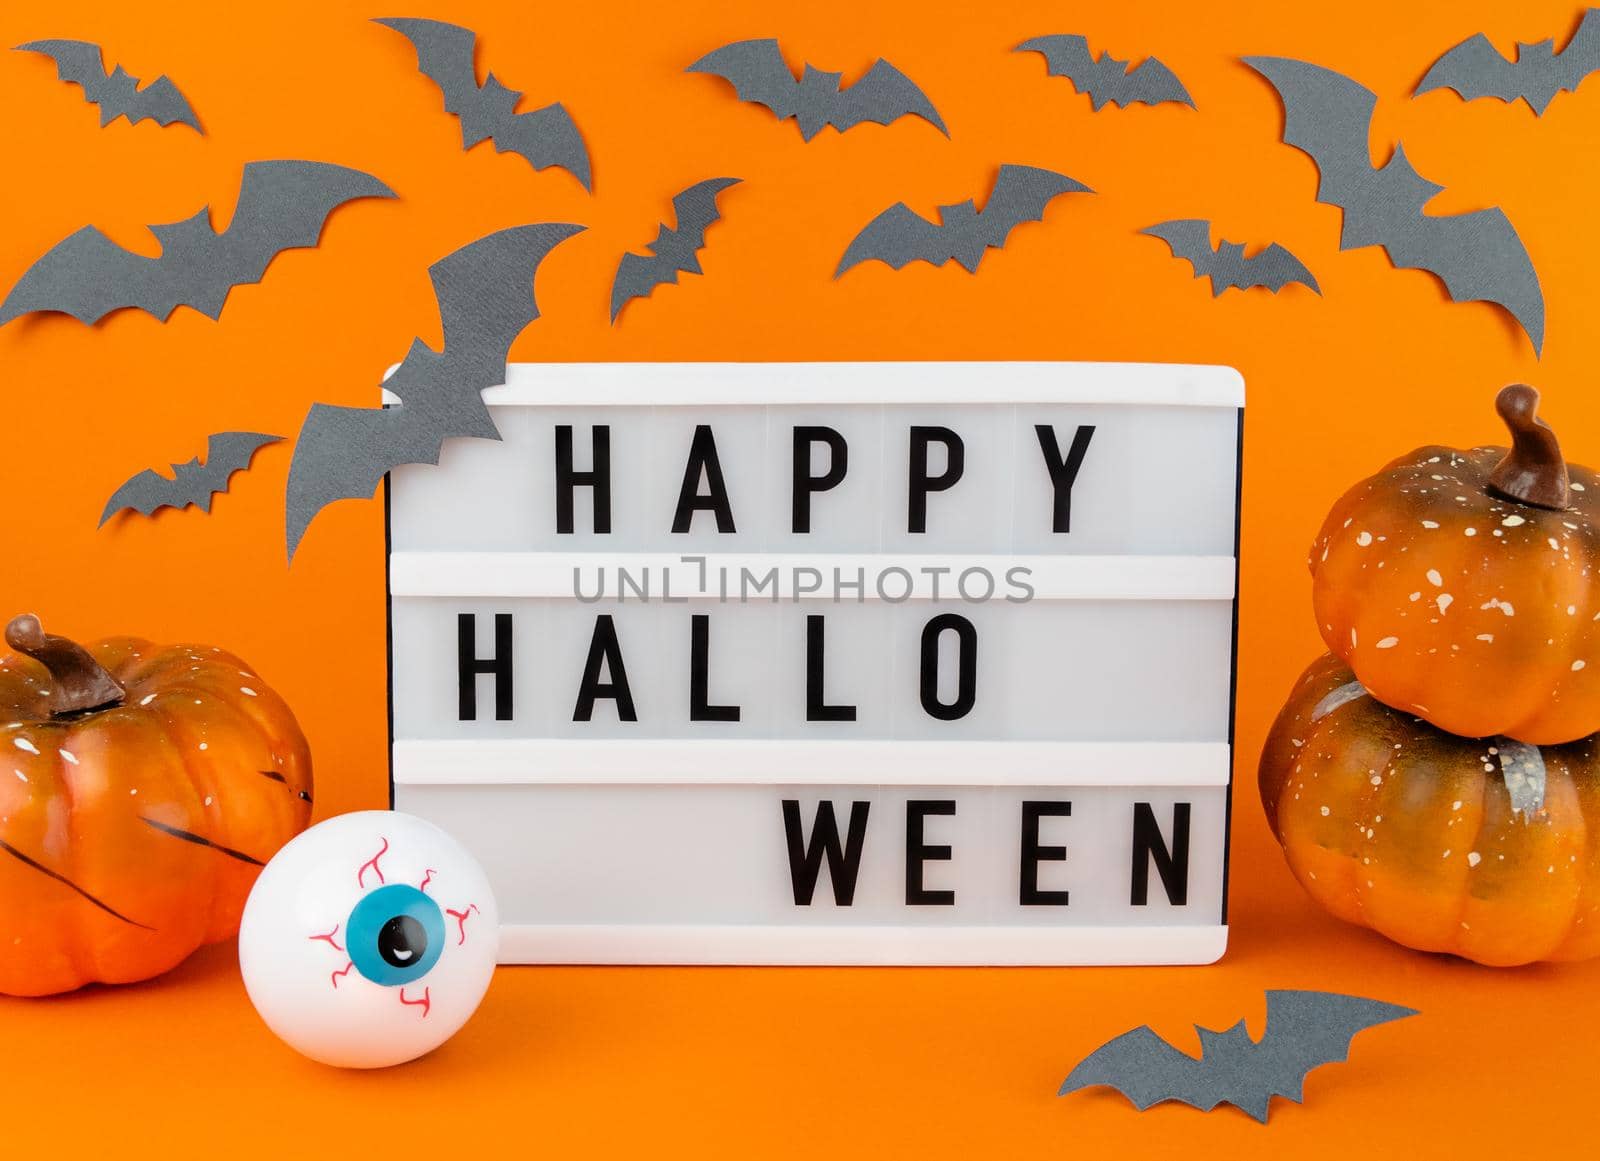 Light box with Happy Halloween phrase with pumpkins, bats and eyeball decoration on orange background.